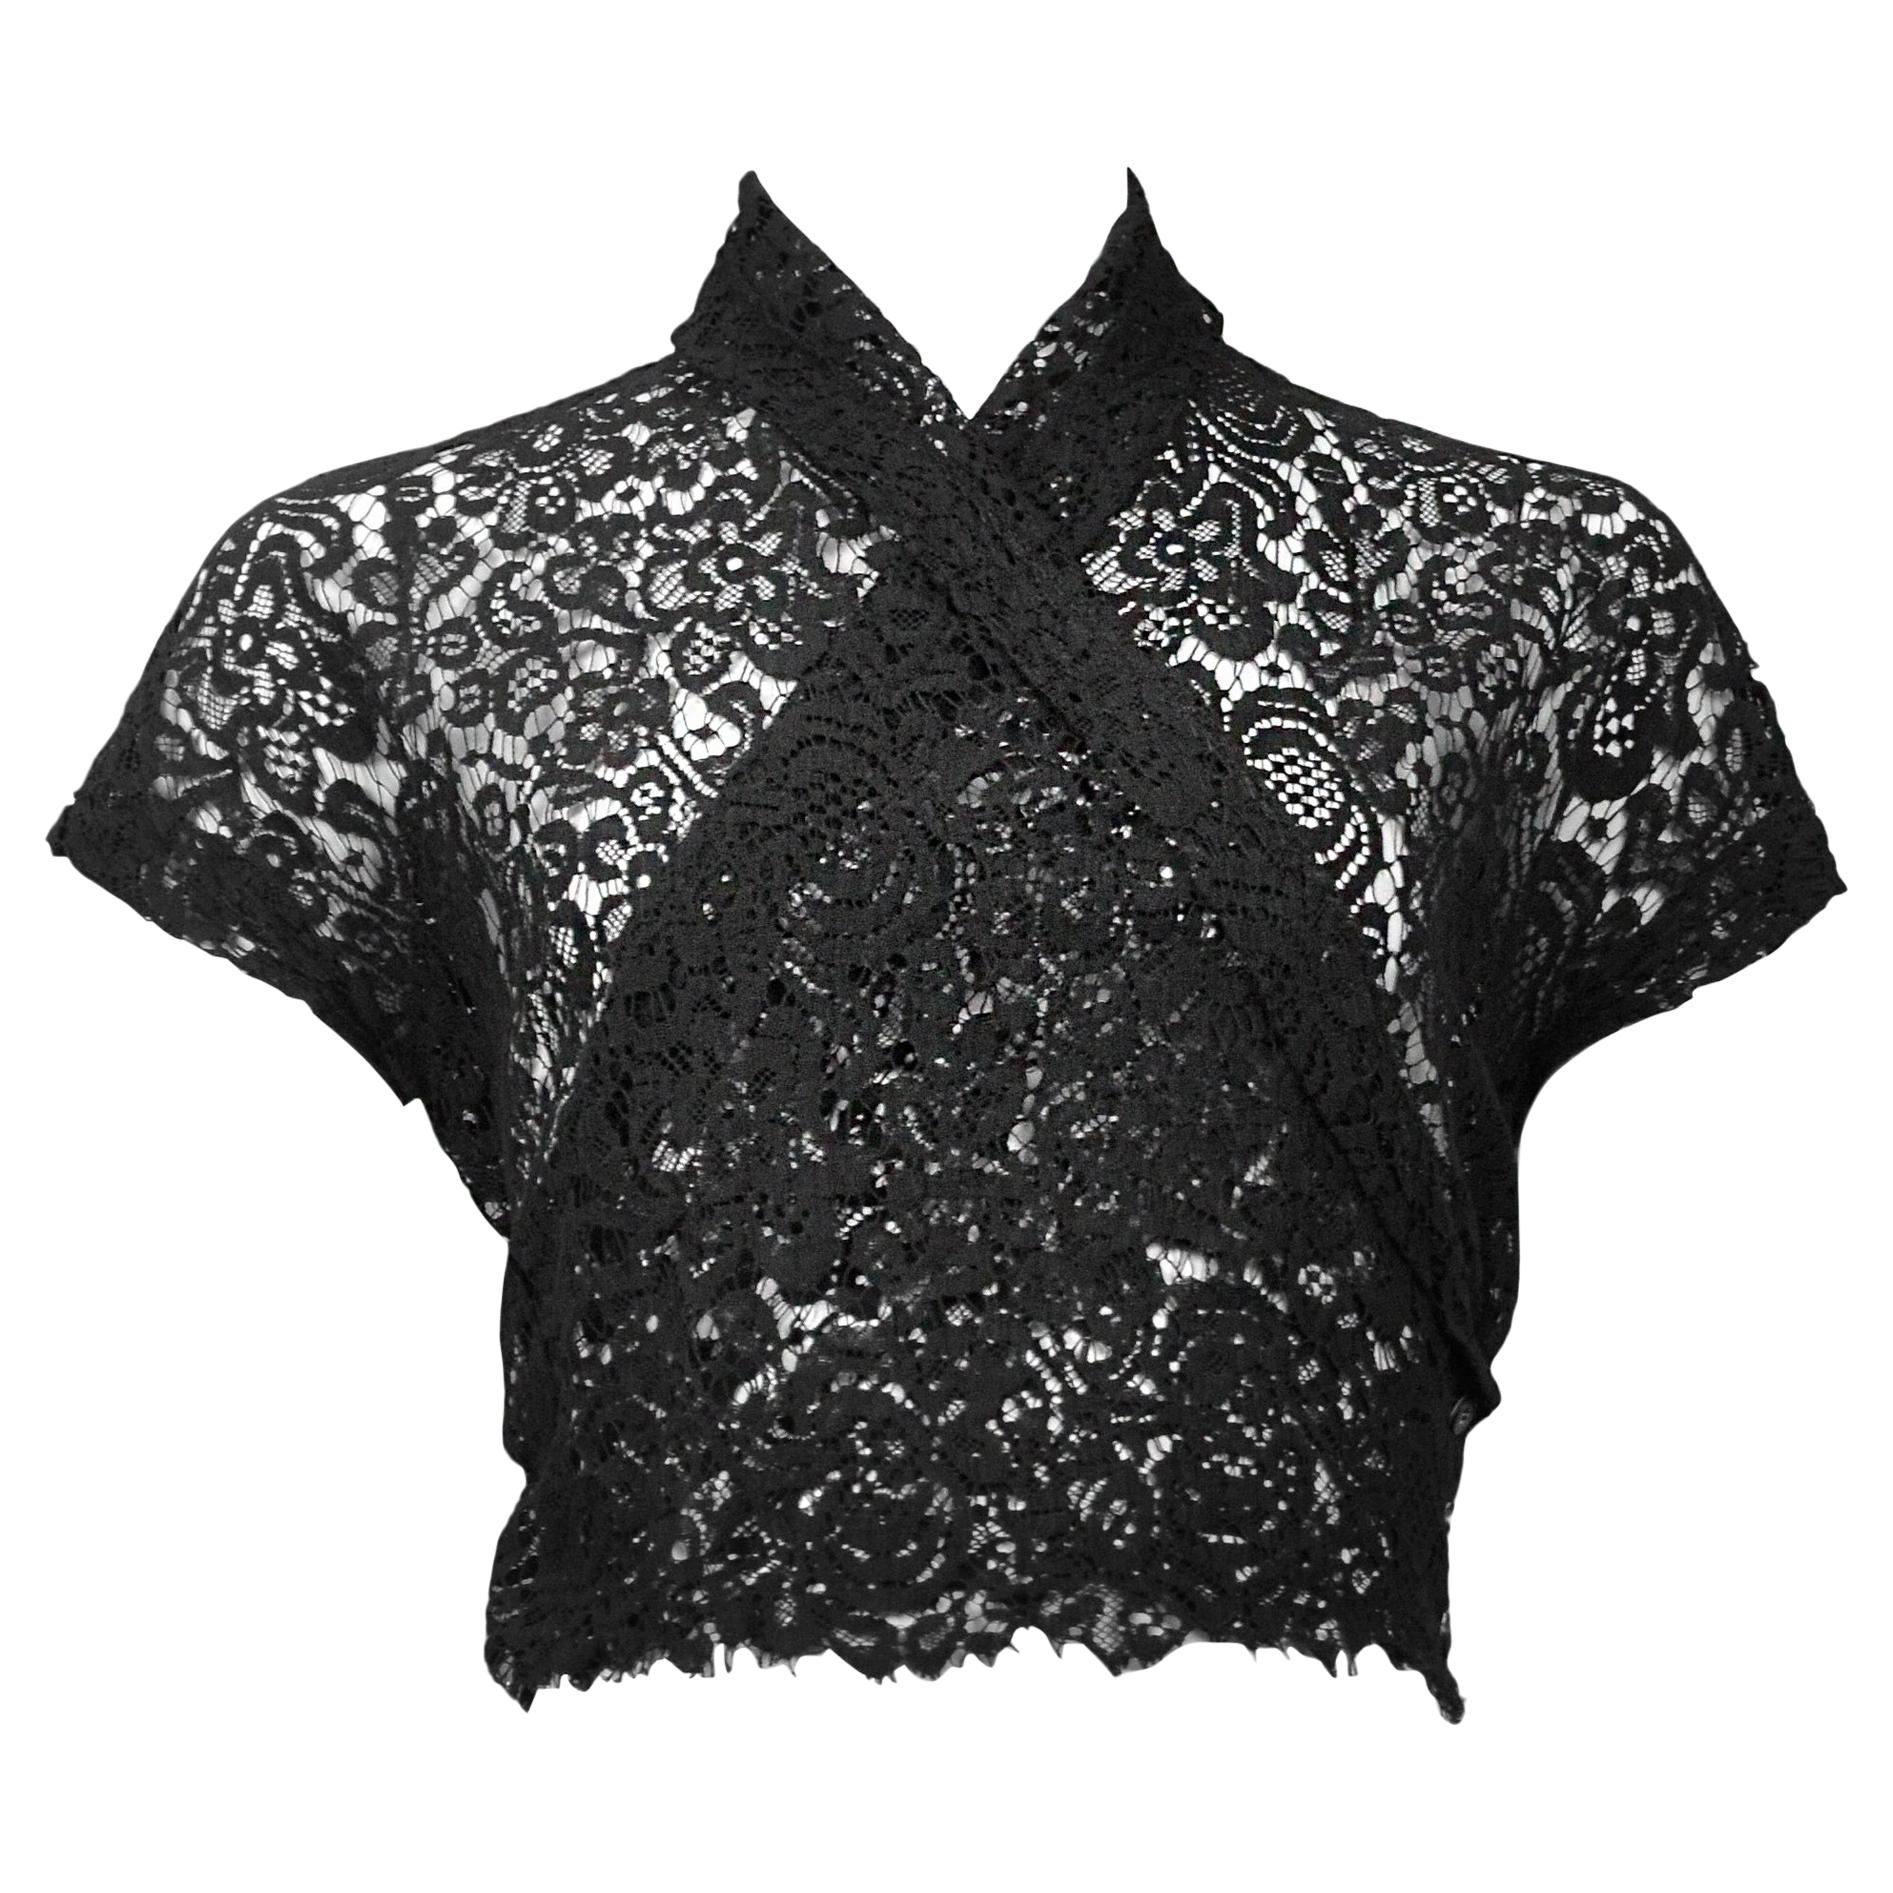 Vintage Callaghan by Romeo Gigli Black Lace Wrap Top